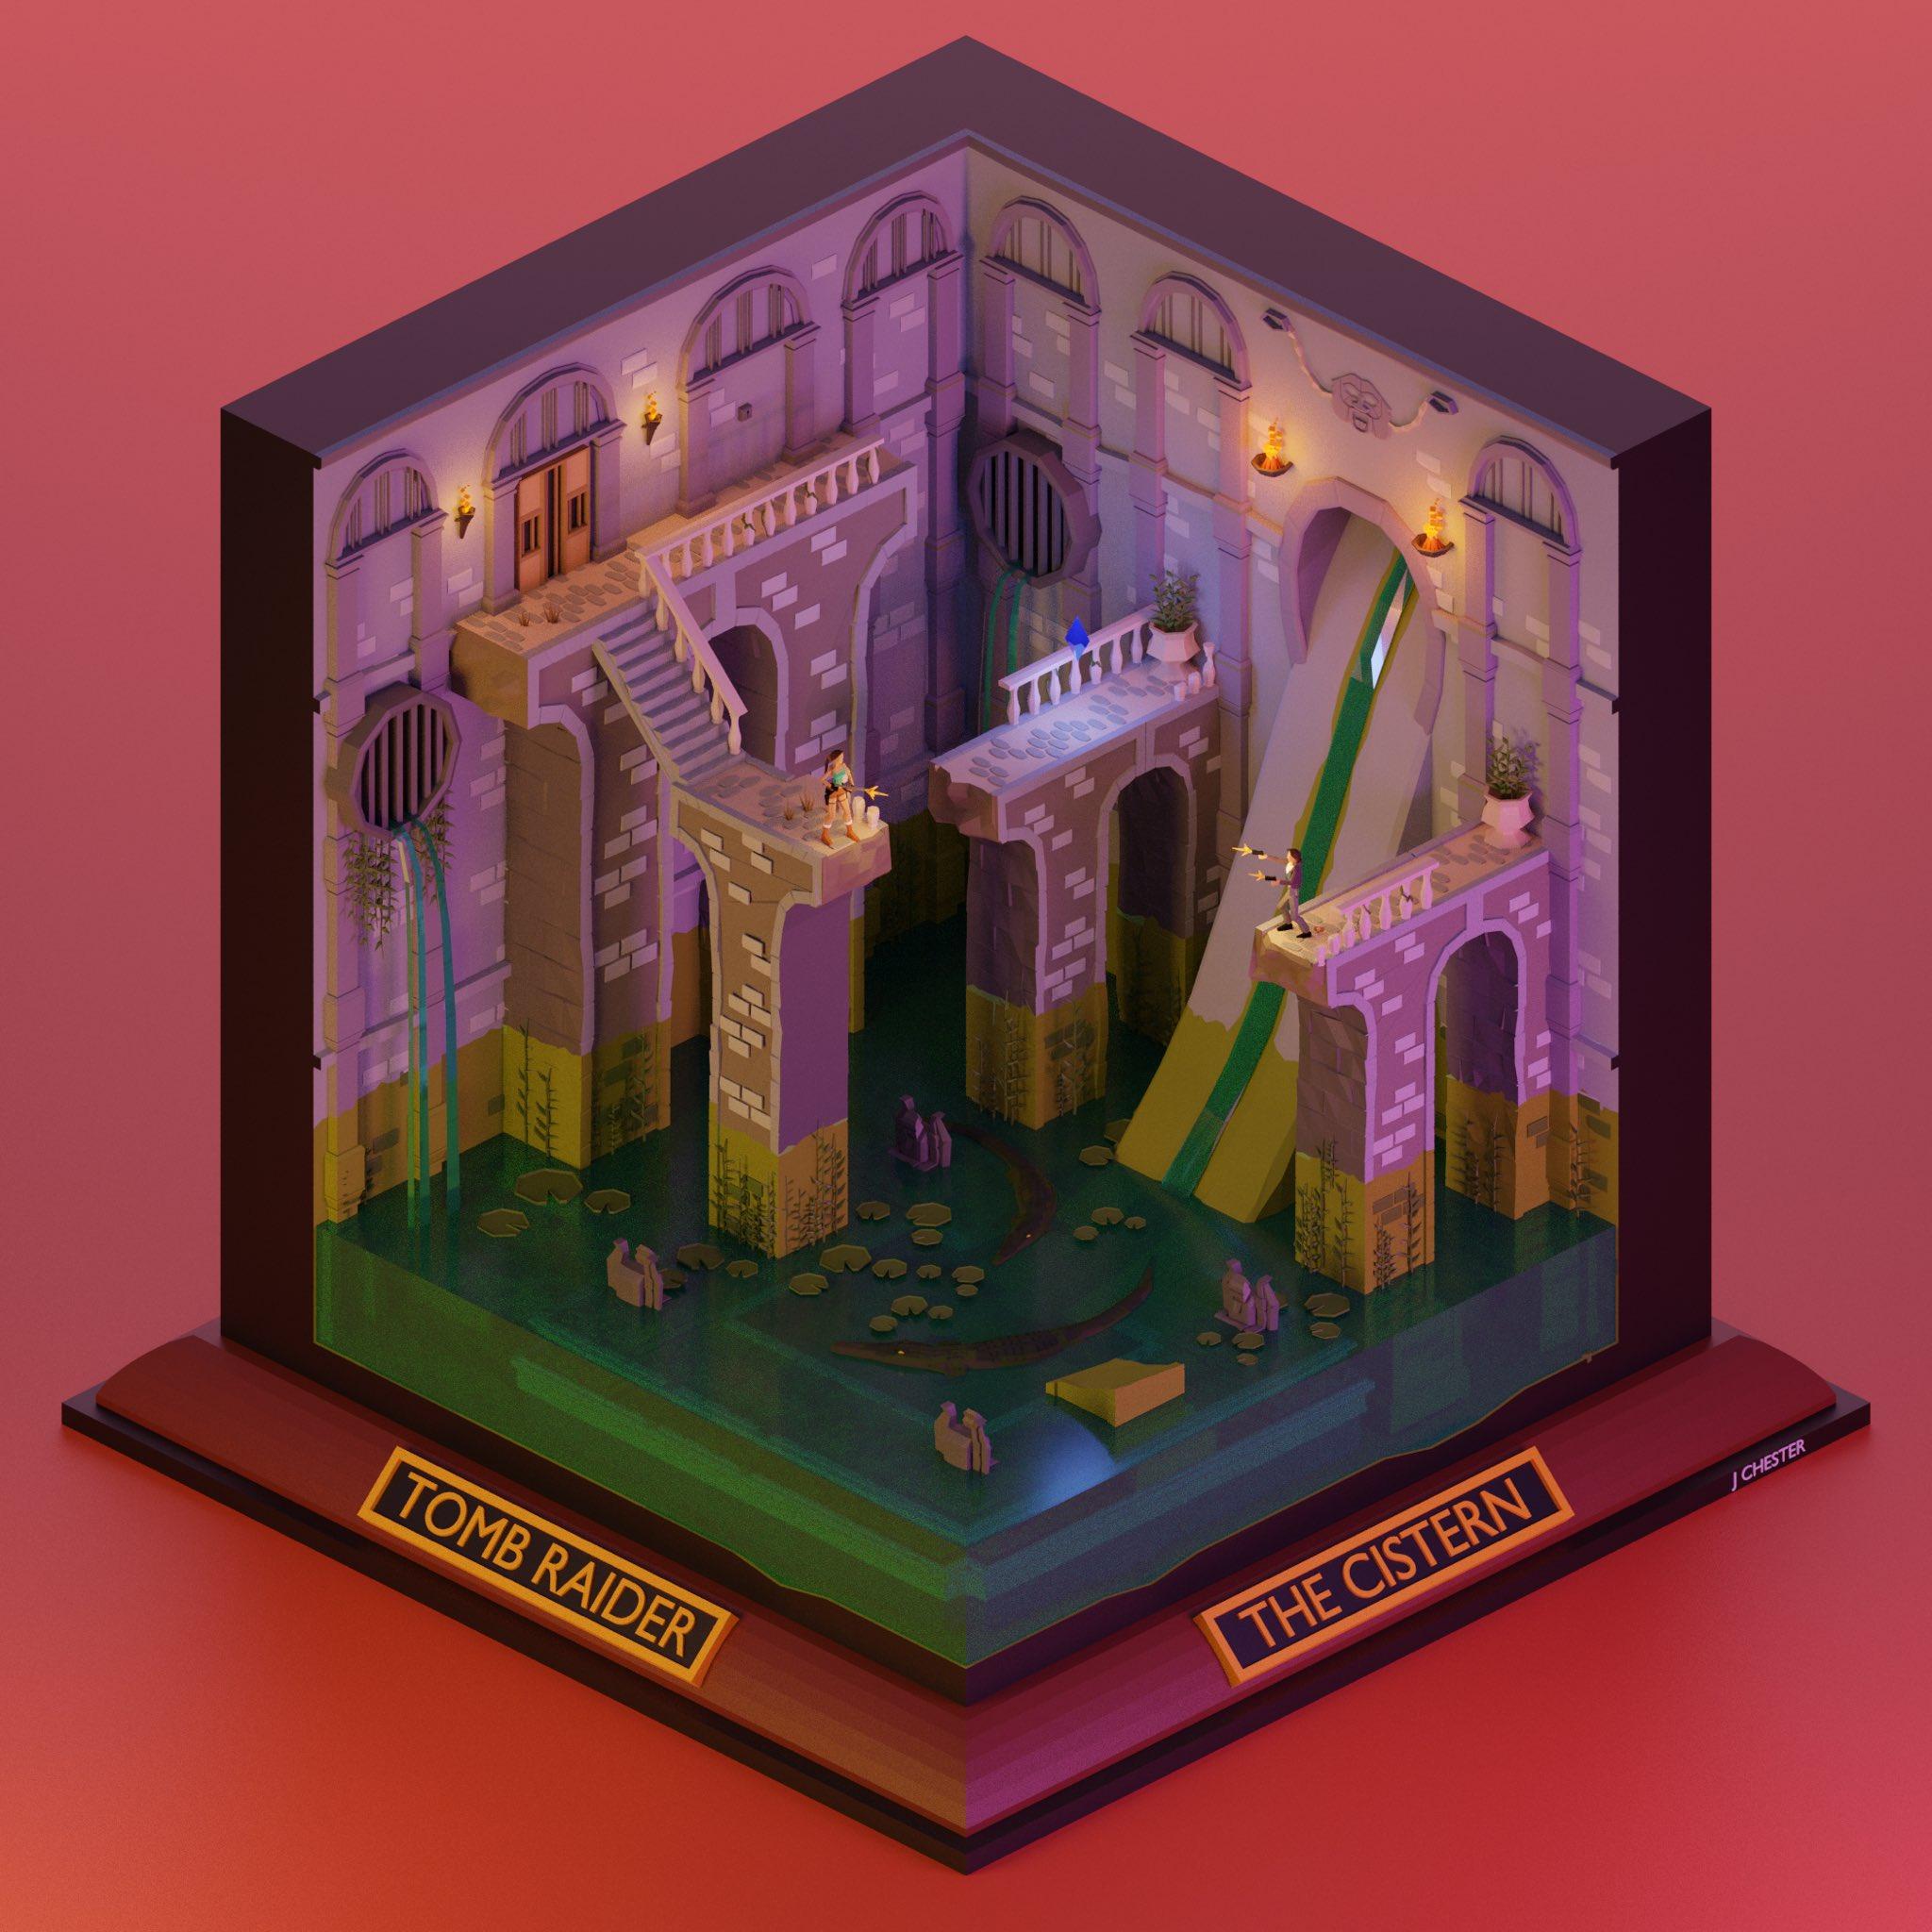 ‘Reimagined Low Poly diorama’ level series by Jason Chester - TR1 - The Cistern